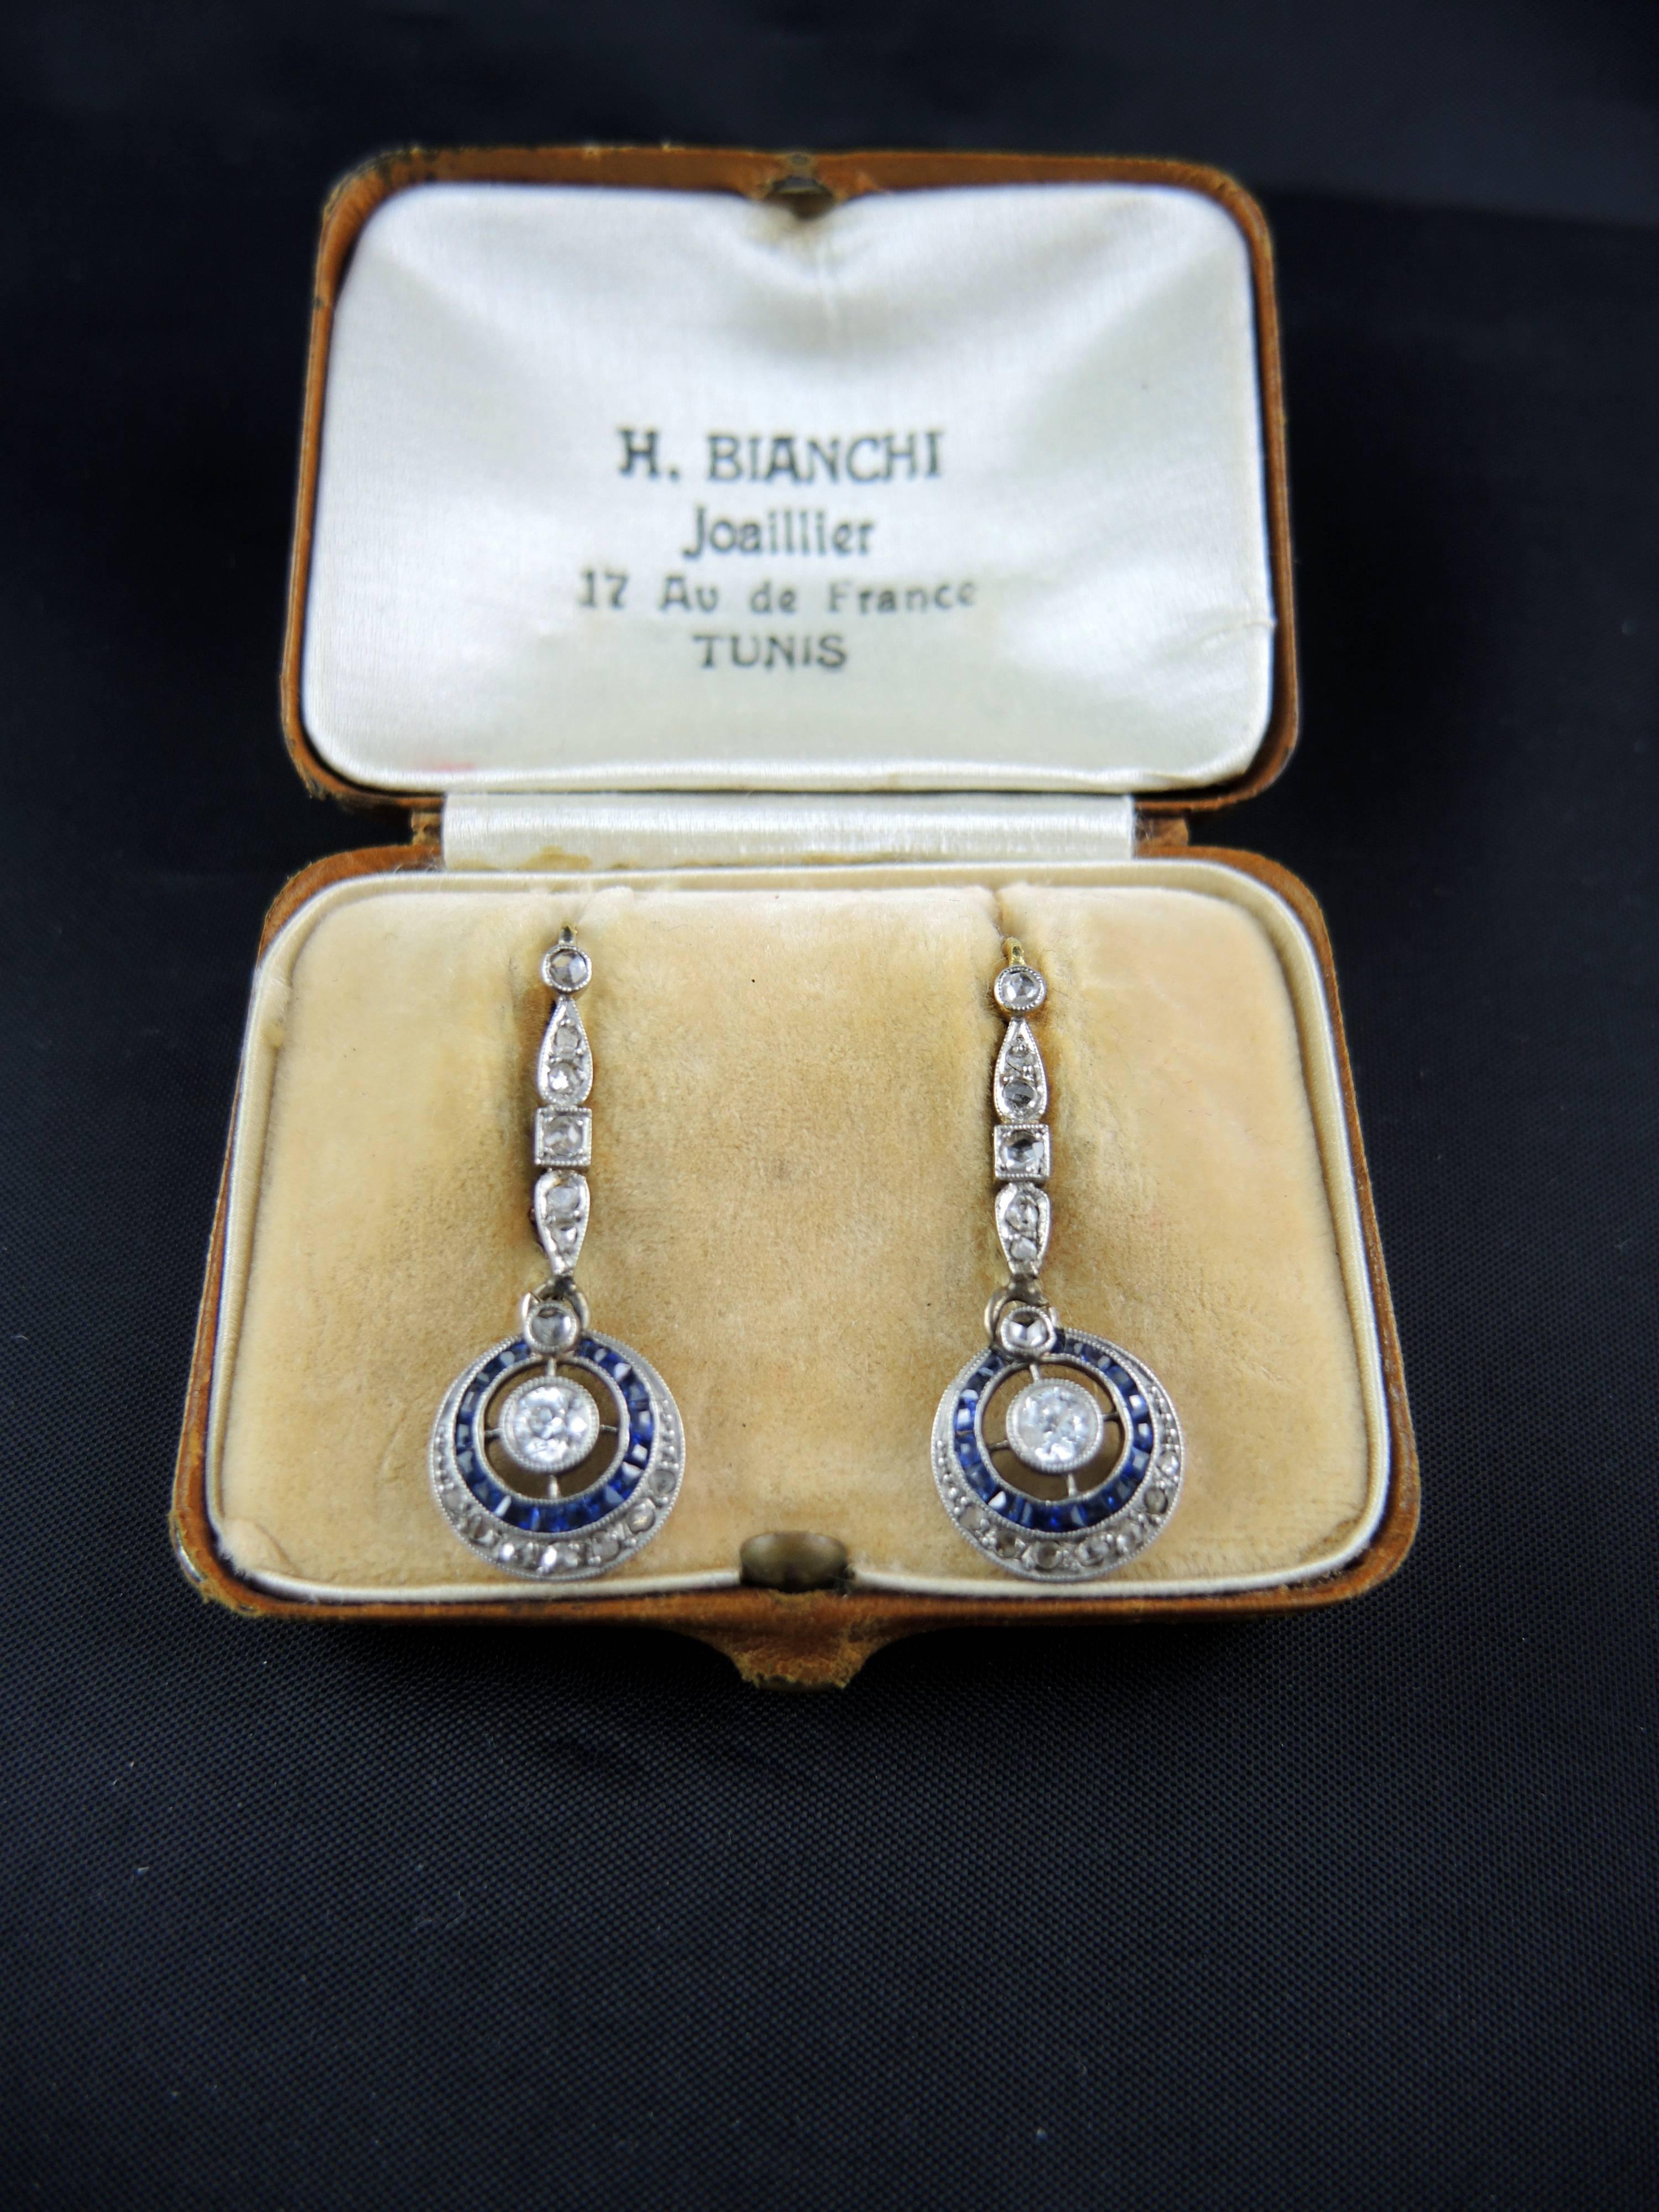 18kt gold antique french earrings (quality mark: head of eagle) set with sapphires, old and rose cut diamonds,

French work from the 20ies.

Weight: 4,00 g
Height: 3,00 cm

State : very little scratches on the gold parts, and light worn of the set,